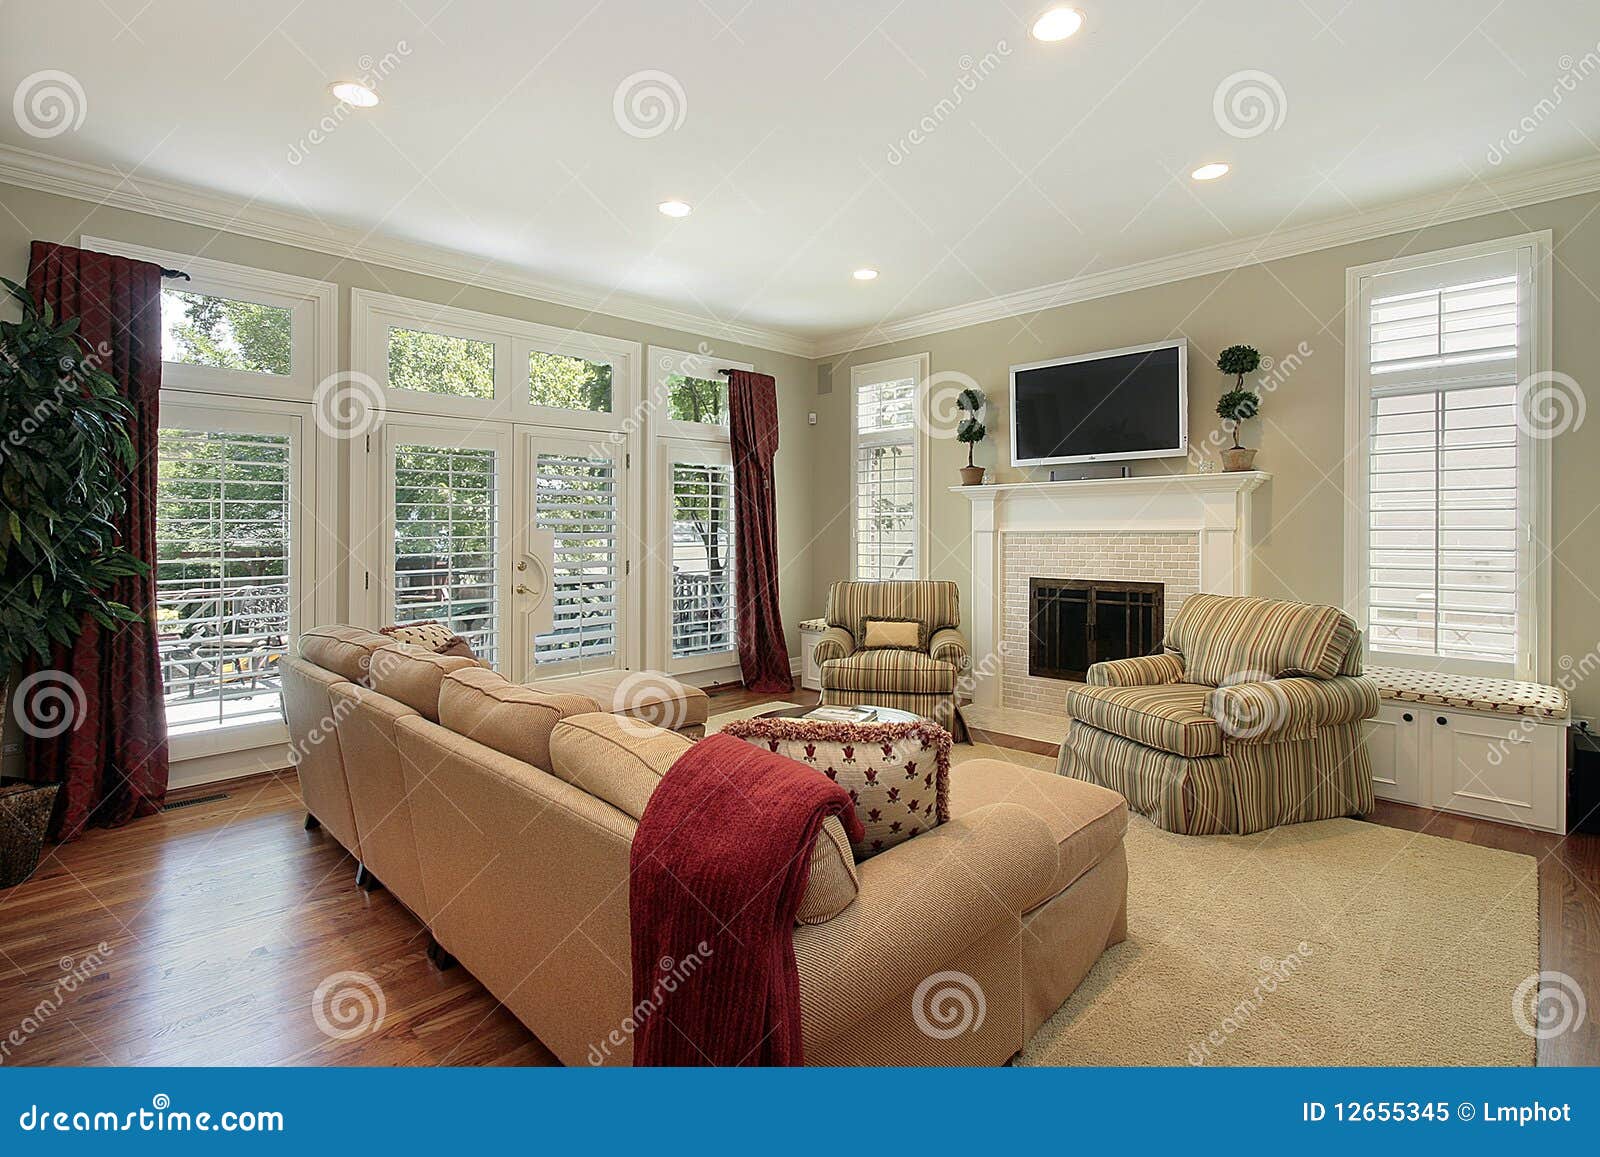  Family  Room  With Brick Fireplace Royalty Free Stock Photo 